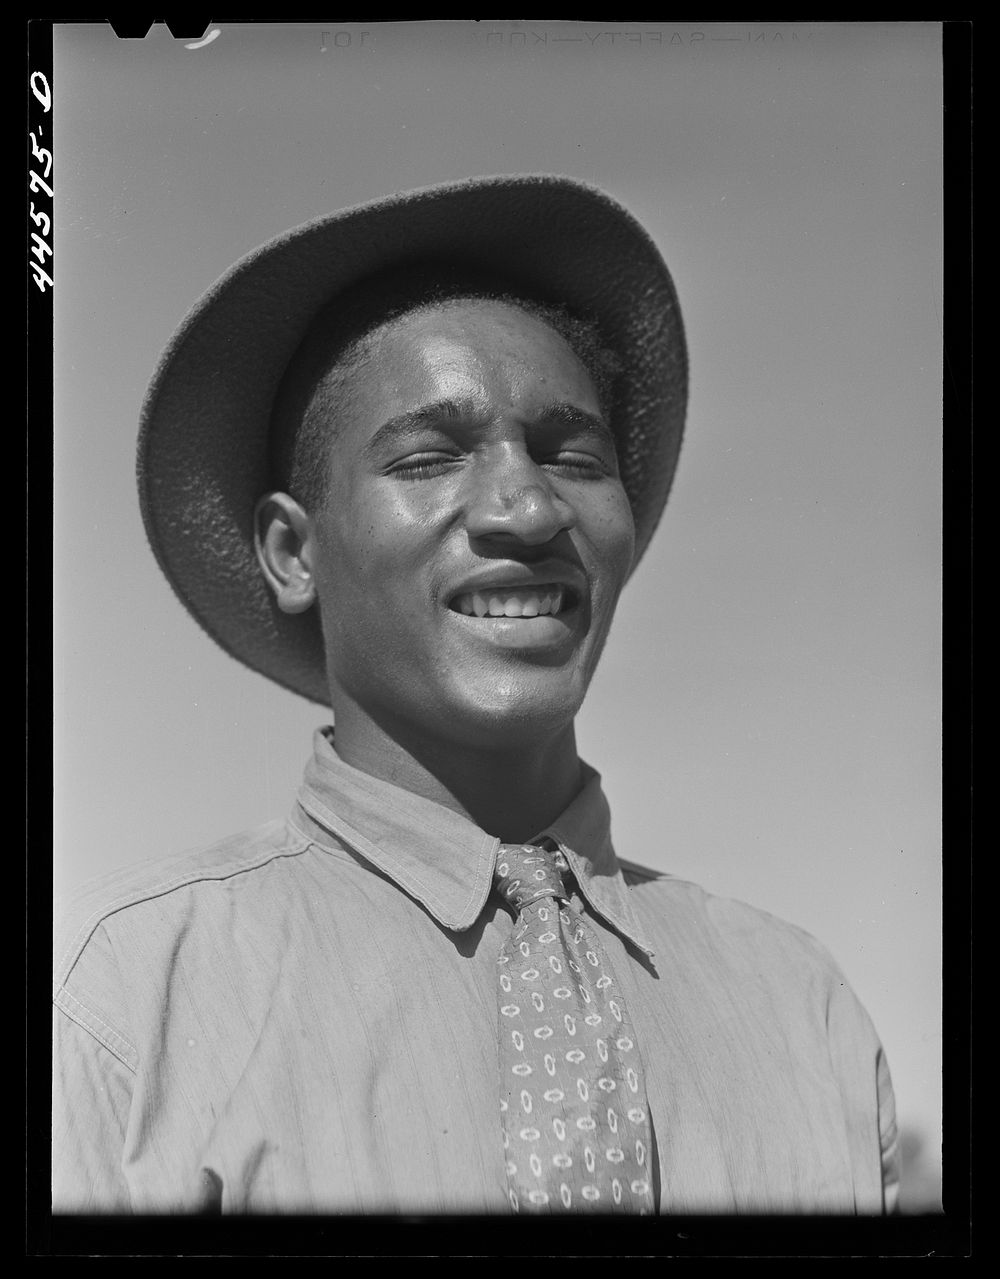 Son of Mrs. D. Saggus, FSA (Farm Security Administration) borrower. Greene County, Georgia. Sourced from the Library of…